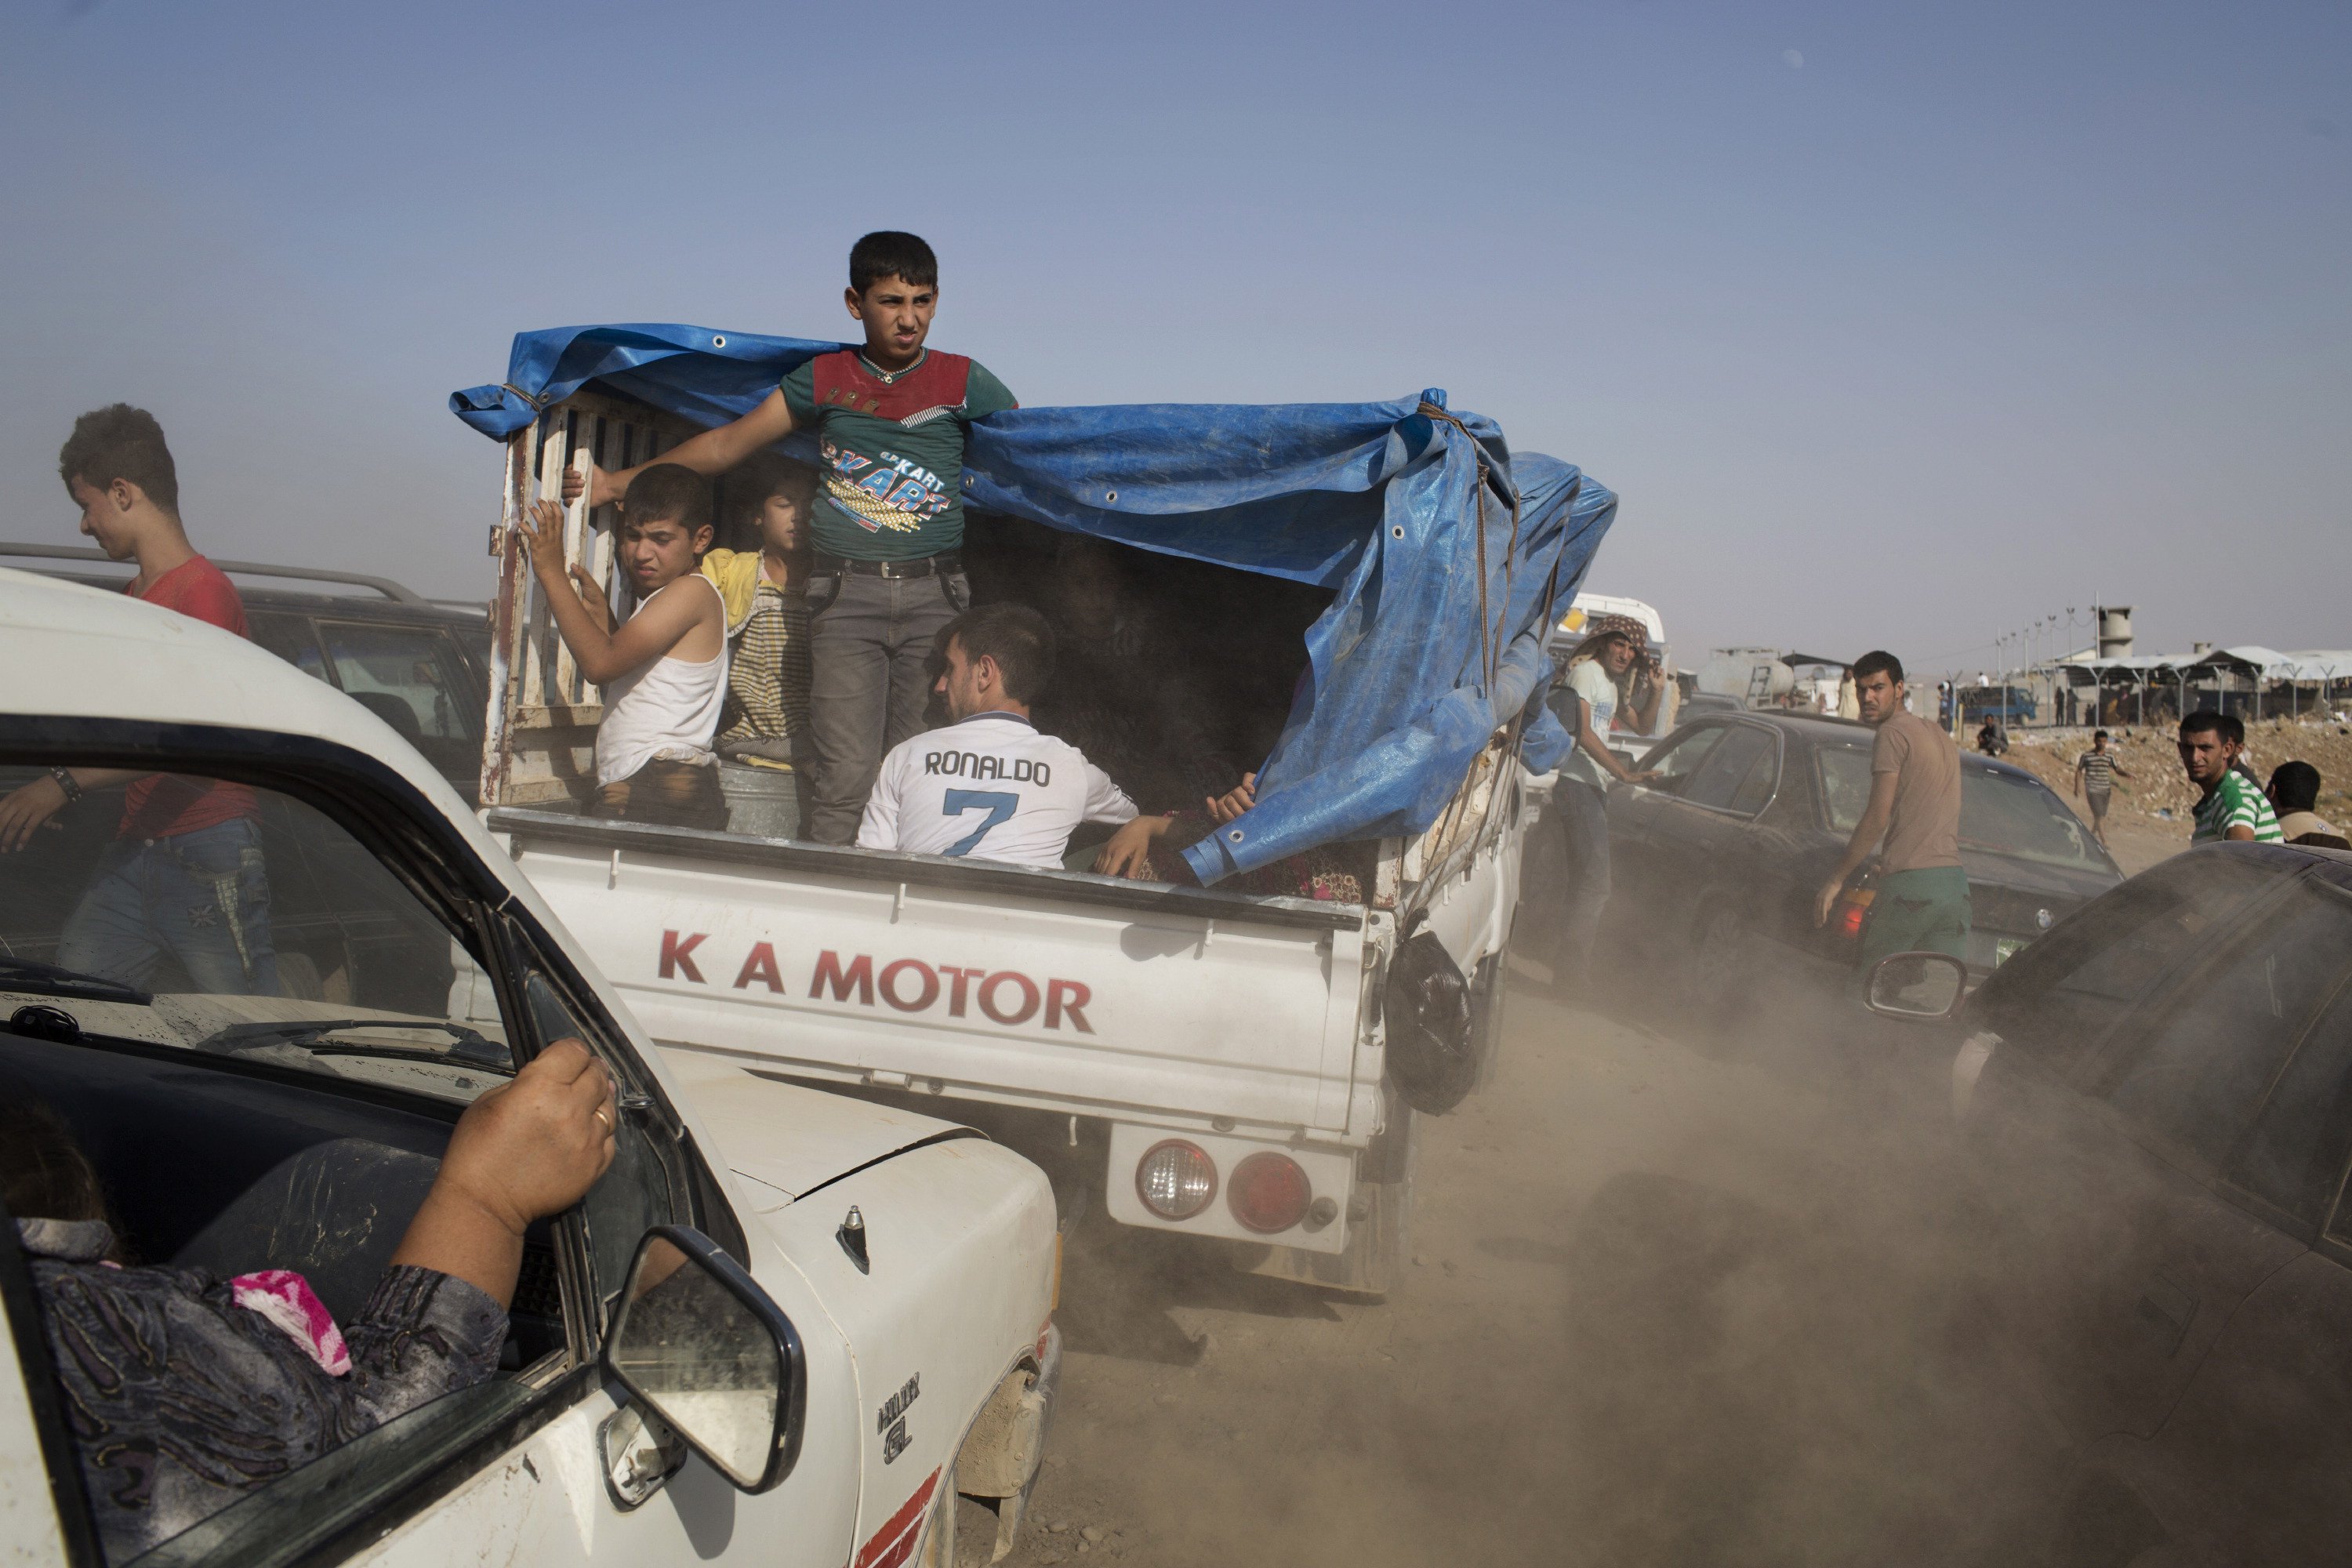 Iraqis arrive at a Kurdish peshmerga controlled checkpoint between Irbil and Mosul after fleeing in fear of ISIS attacks, Aug. 6, 2014. (Adam Ferguson—The New York Times/Redux)